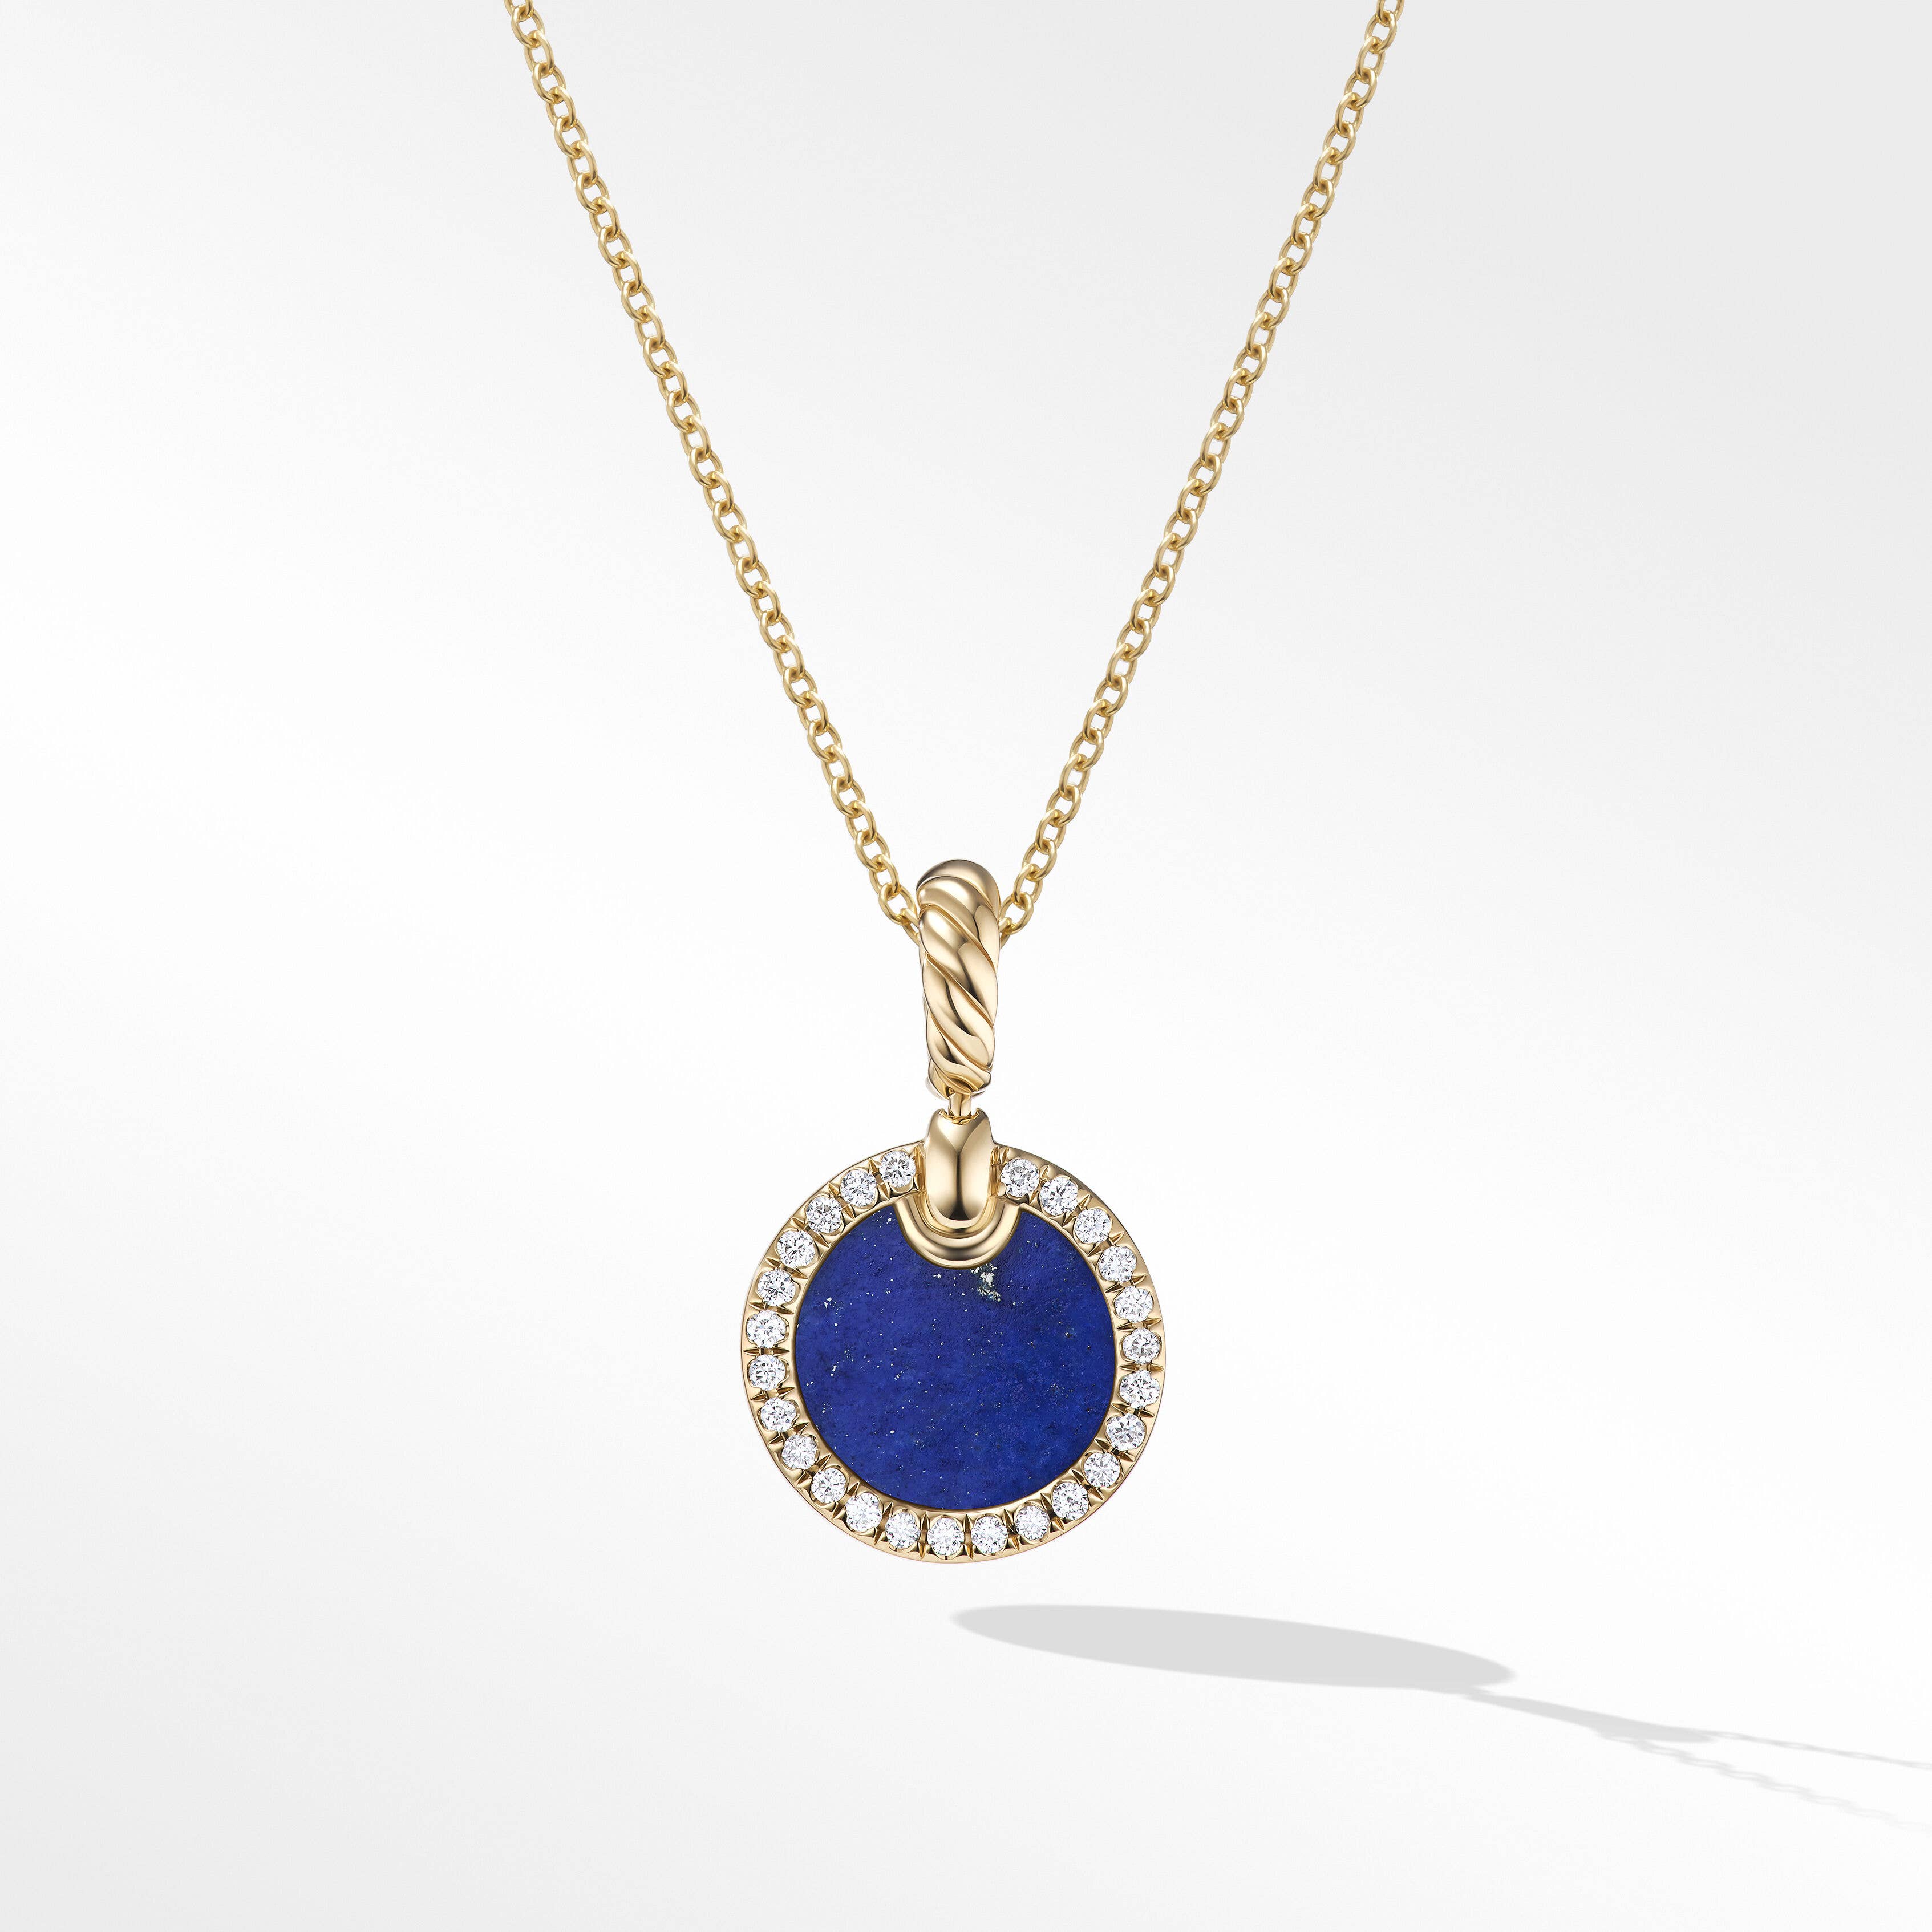 Petite DY Elements® Pendant Necklace in 18K Yellow Gold with Lapis and Pavé Diamonds